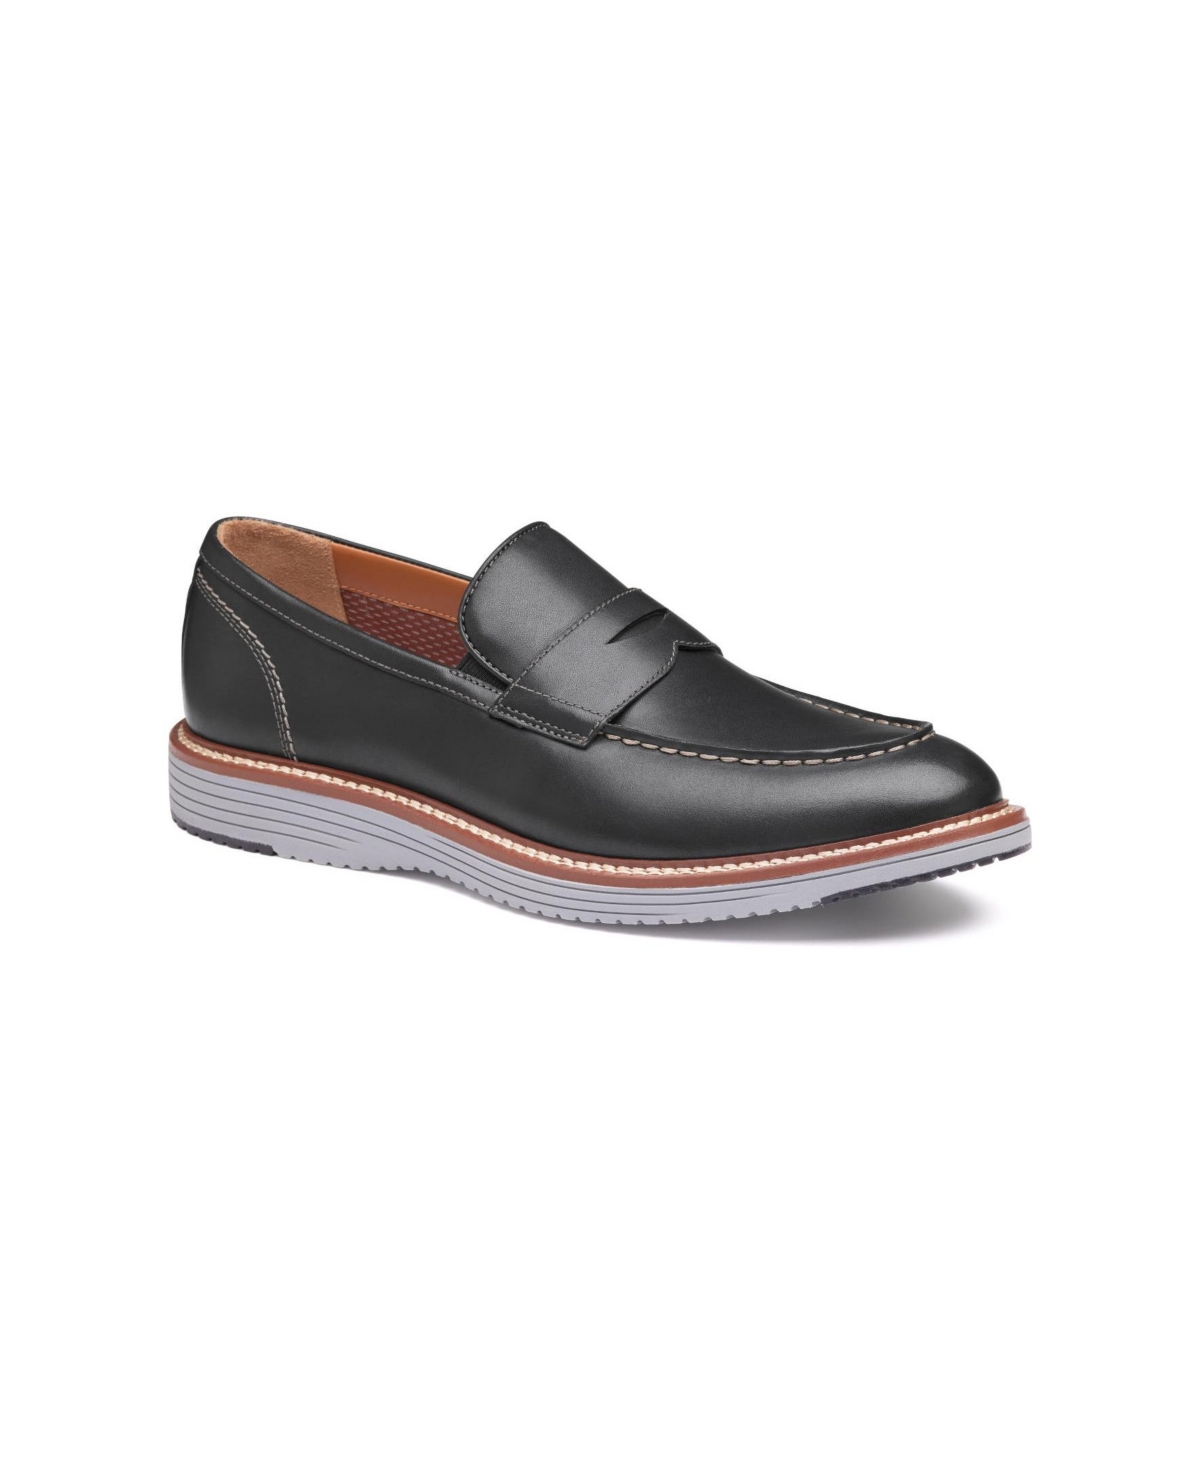 Johnston & Murphy Men's Upton Leather Penny Loafers In Black Full Grain Leather